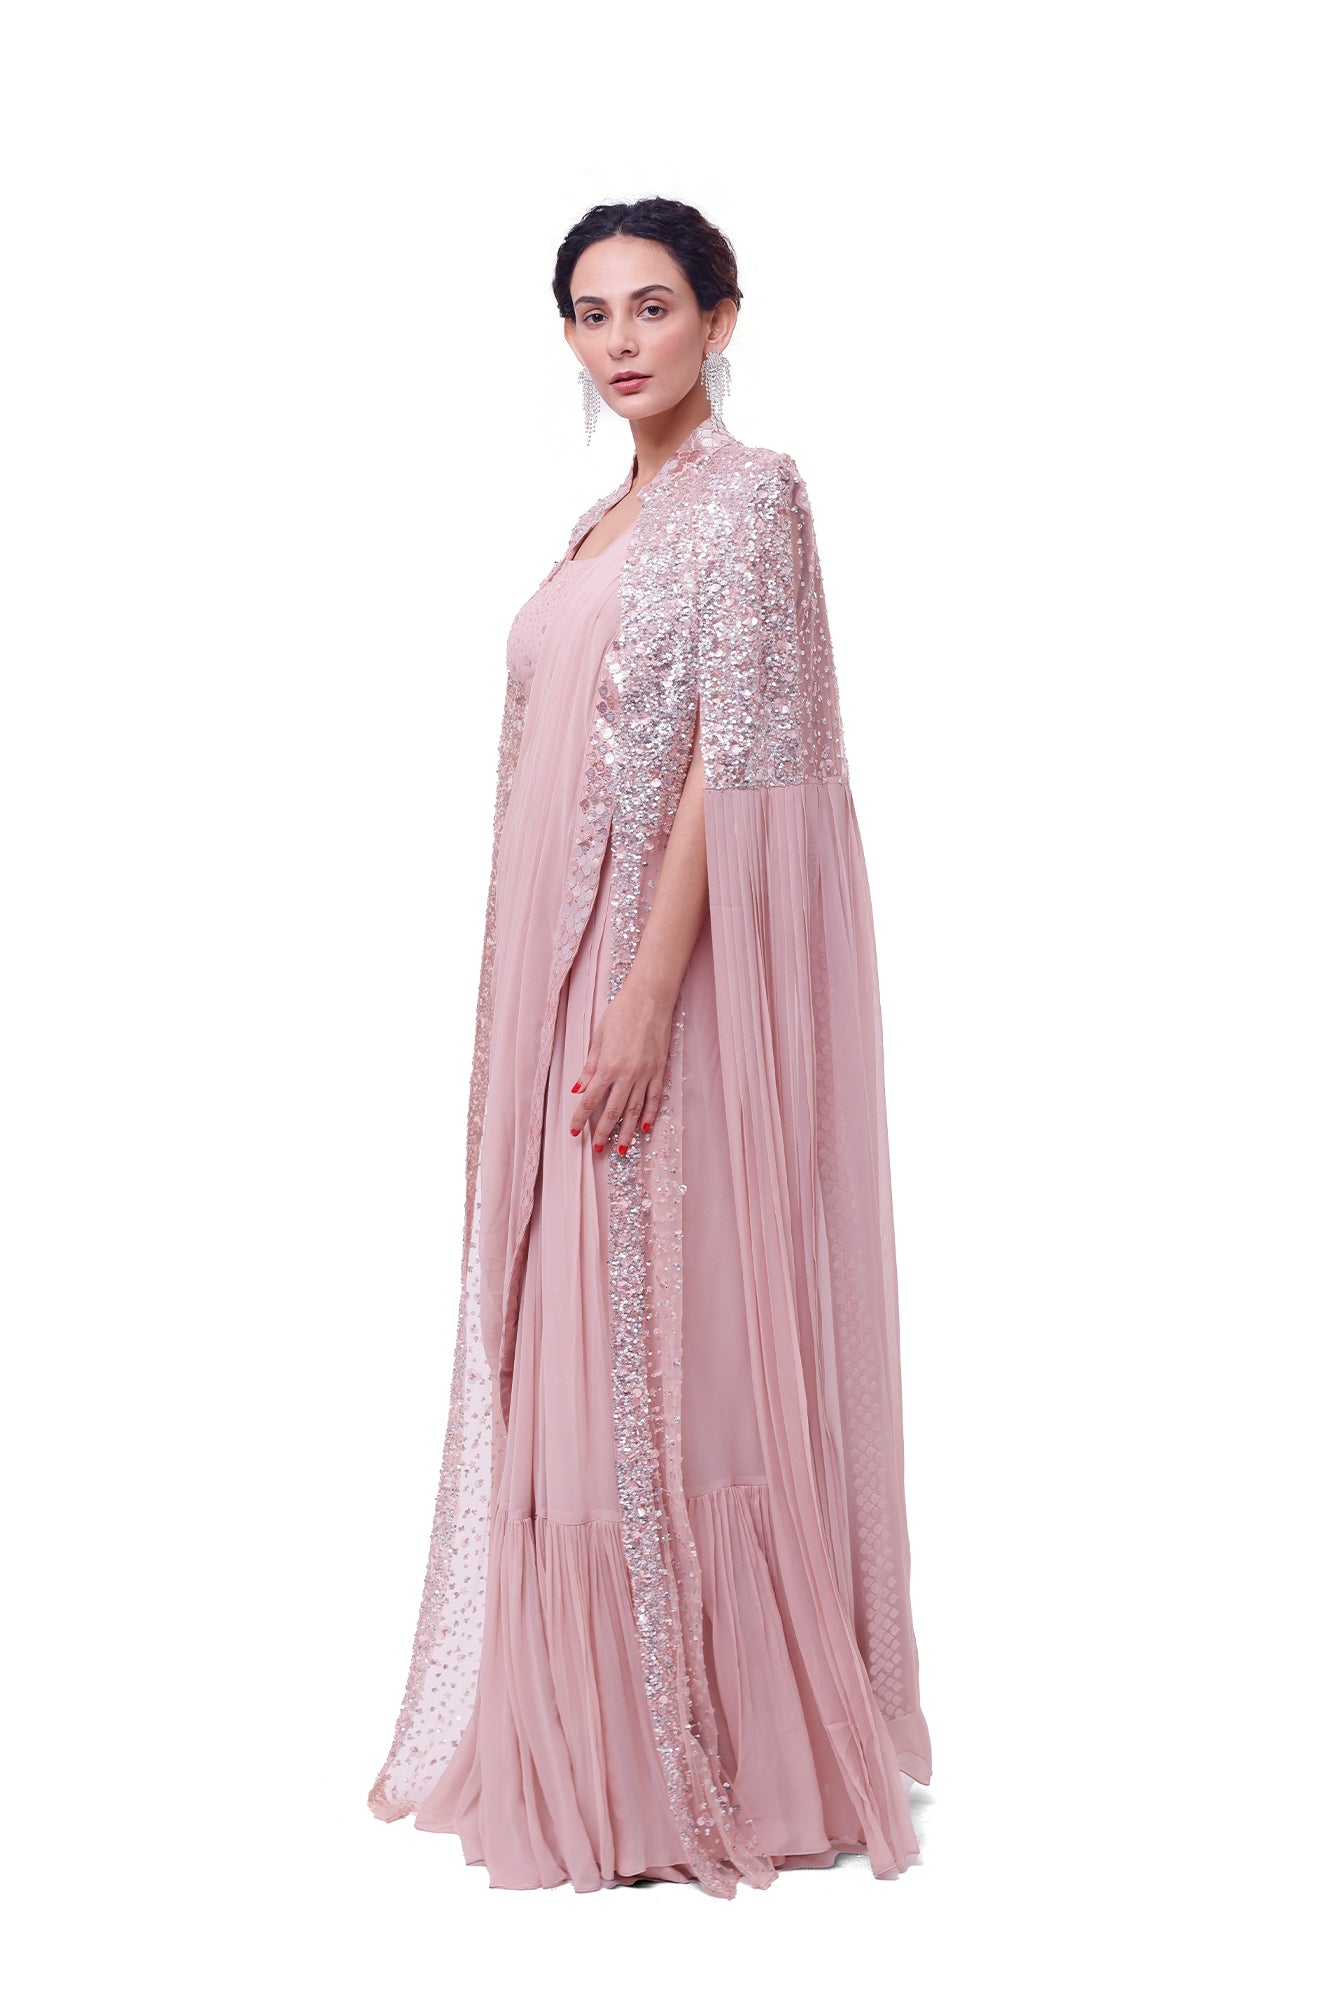 Buy light pink georgette saree online in USA with tasseled cape. Look your best at parties and weddings in beautiful designer sarees, embroidered sarees, handwoven sarees, silk sarees, organza saris from Pure Elegance Indian saree store in USA.-saree